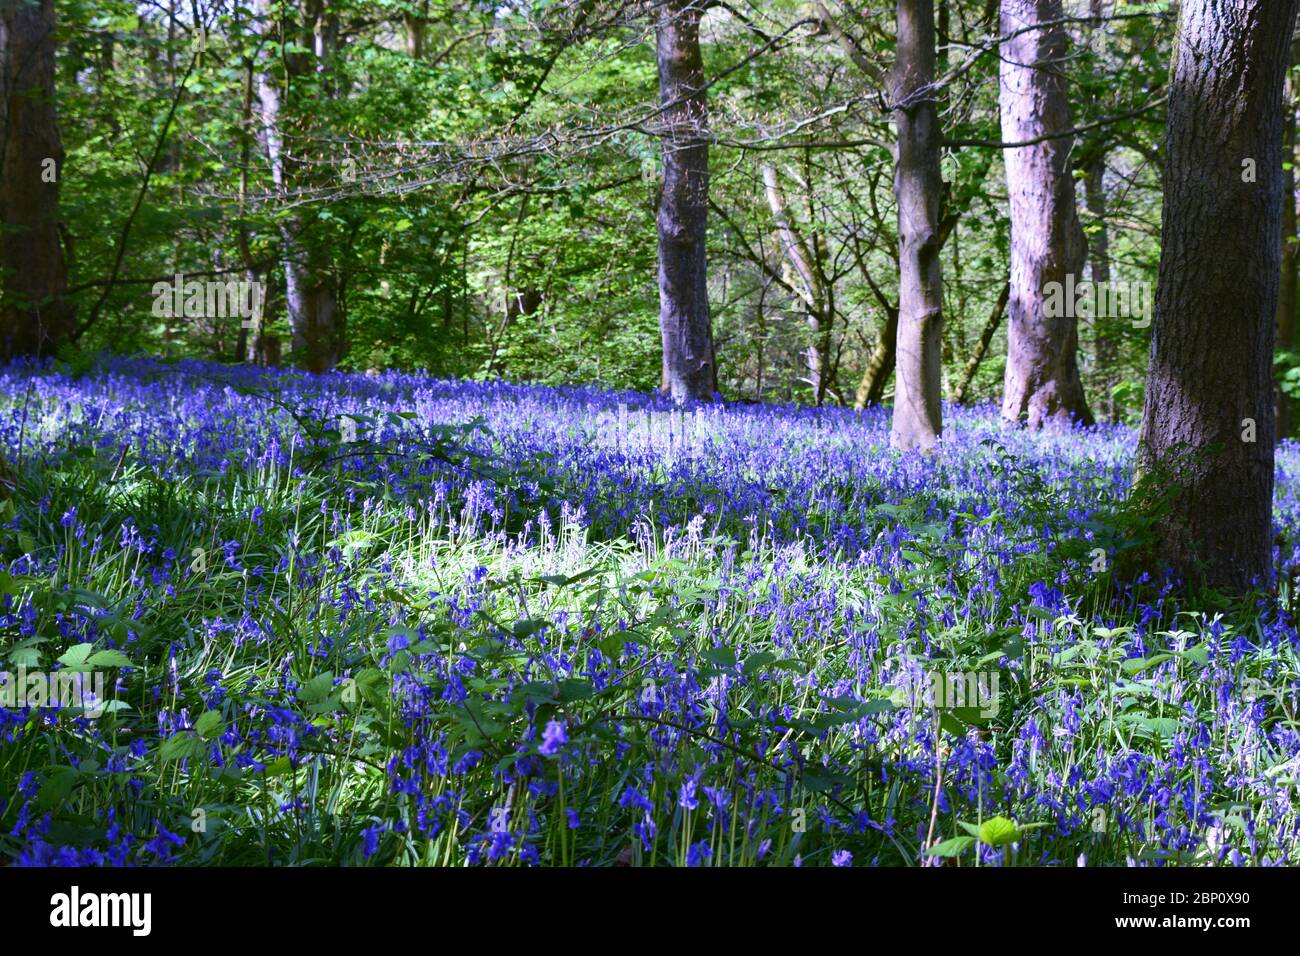 Ancient British woodland carpeted in a mass of bluebells Stock Photo